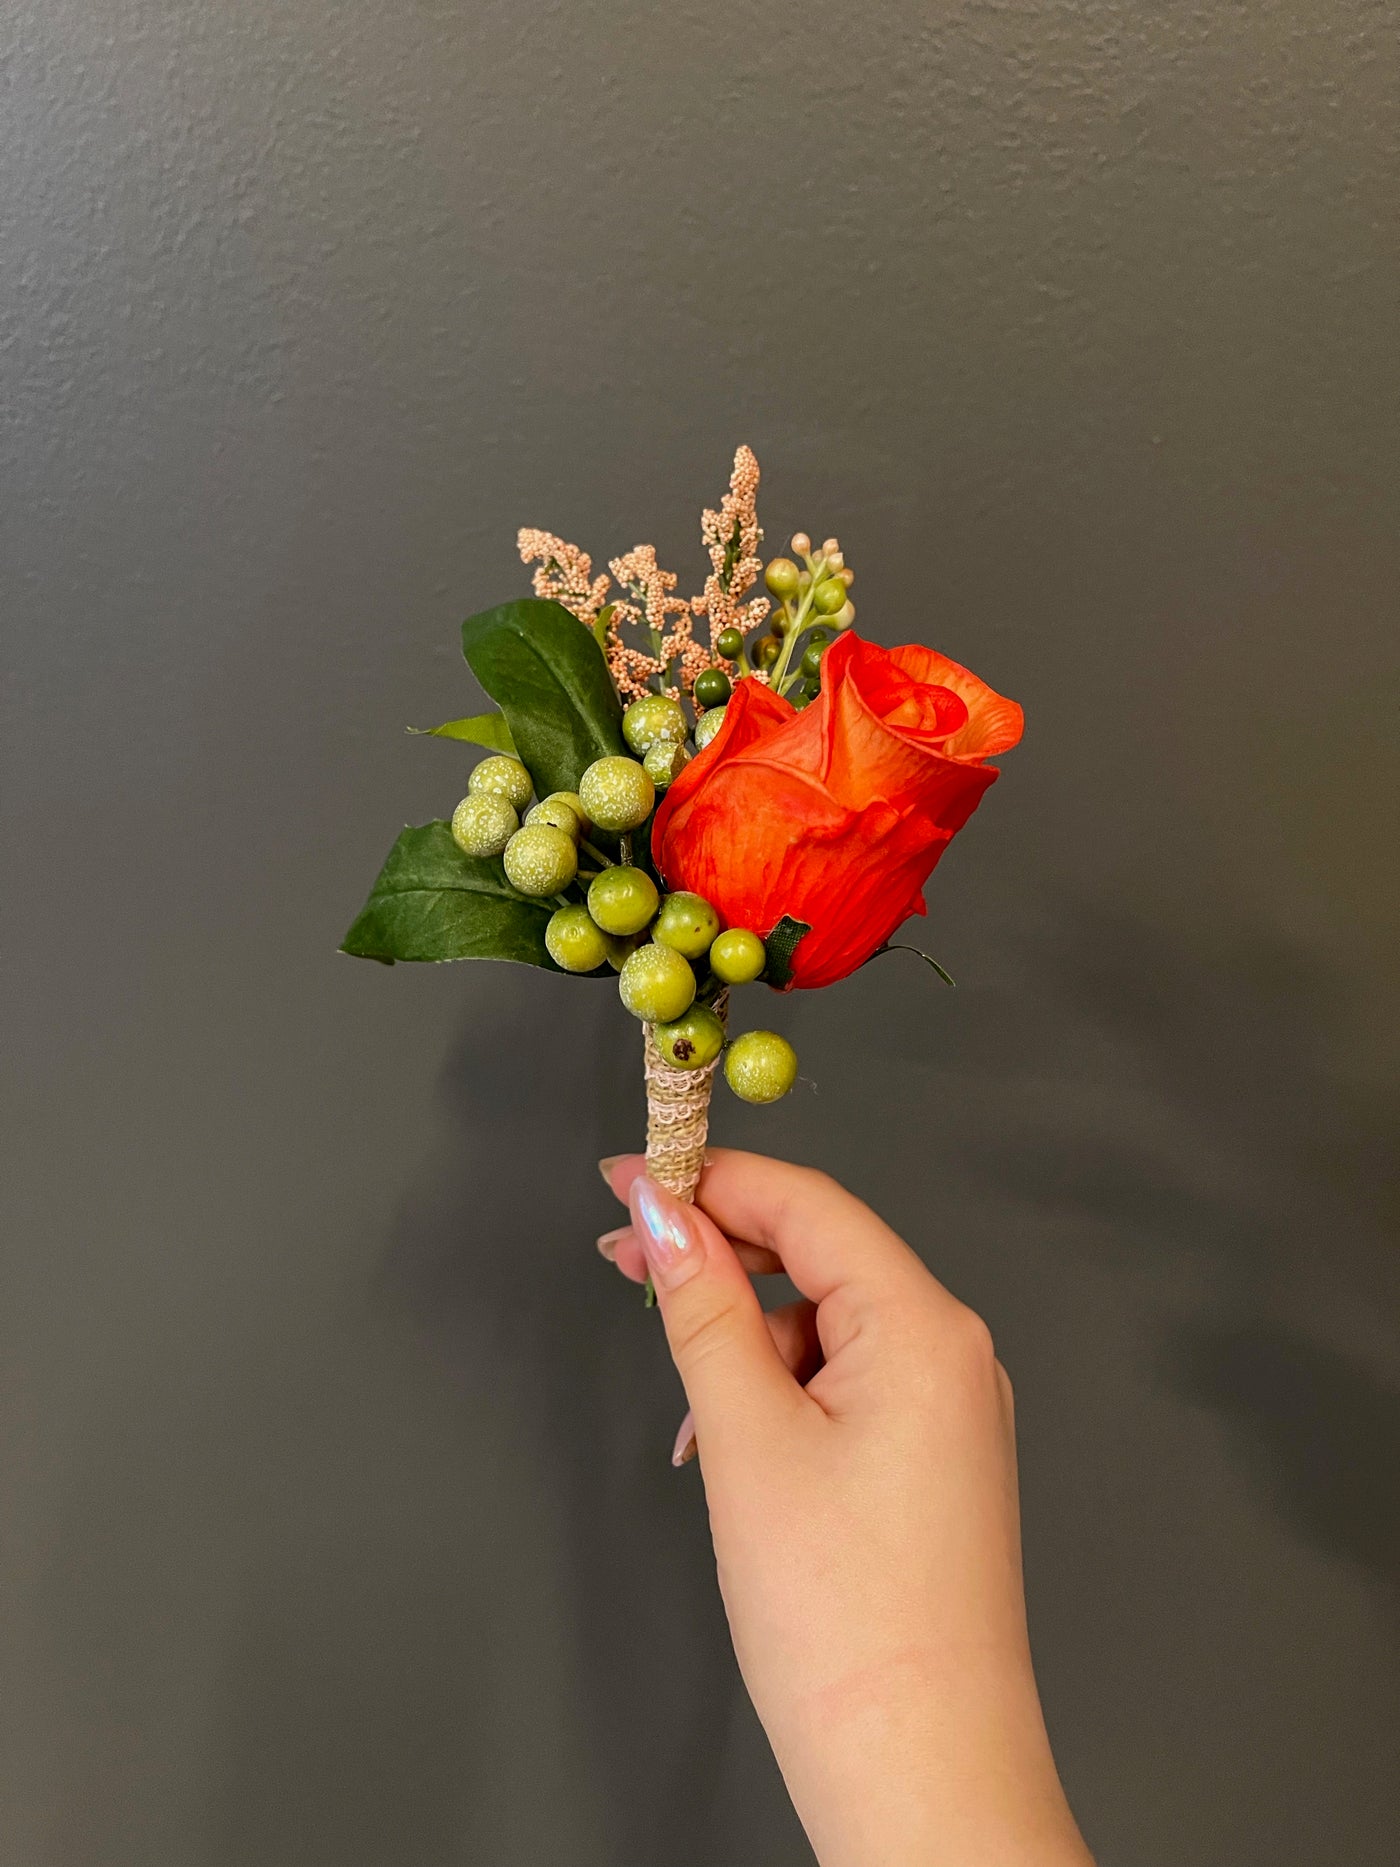 A single dramatic orange rose coupled with green hypericum berries and peach tree leaves wrapped in a burlap ribbon.A single dramatic orange rose coupled with green hypericum berries and peach tree leaves wrapped in a burlap ribbon.